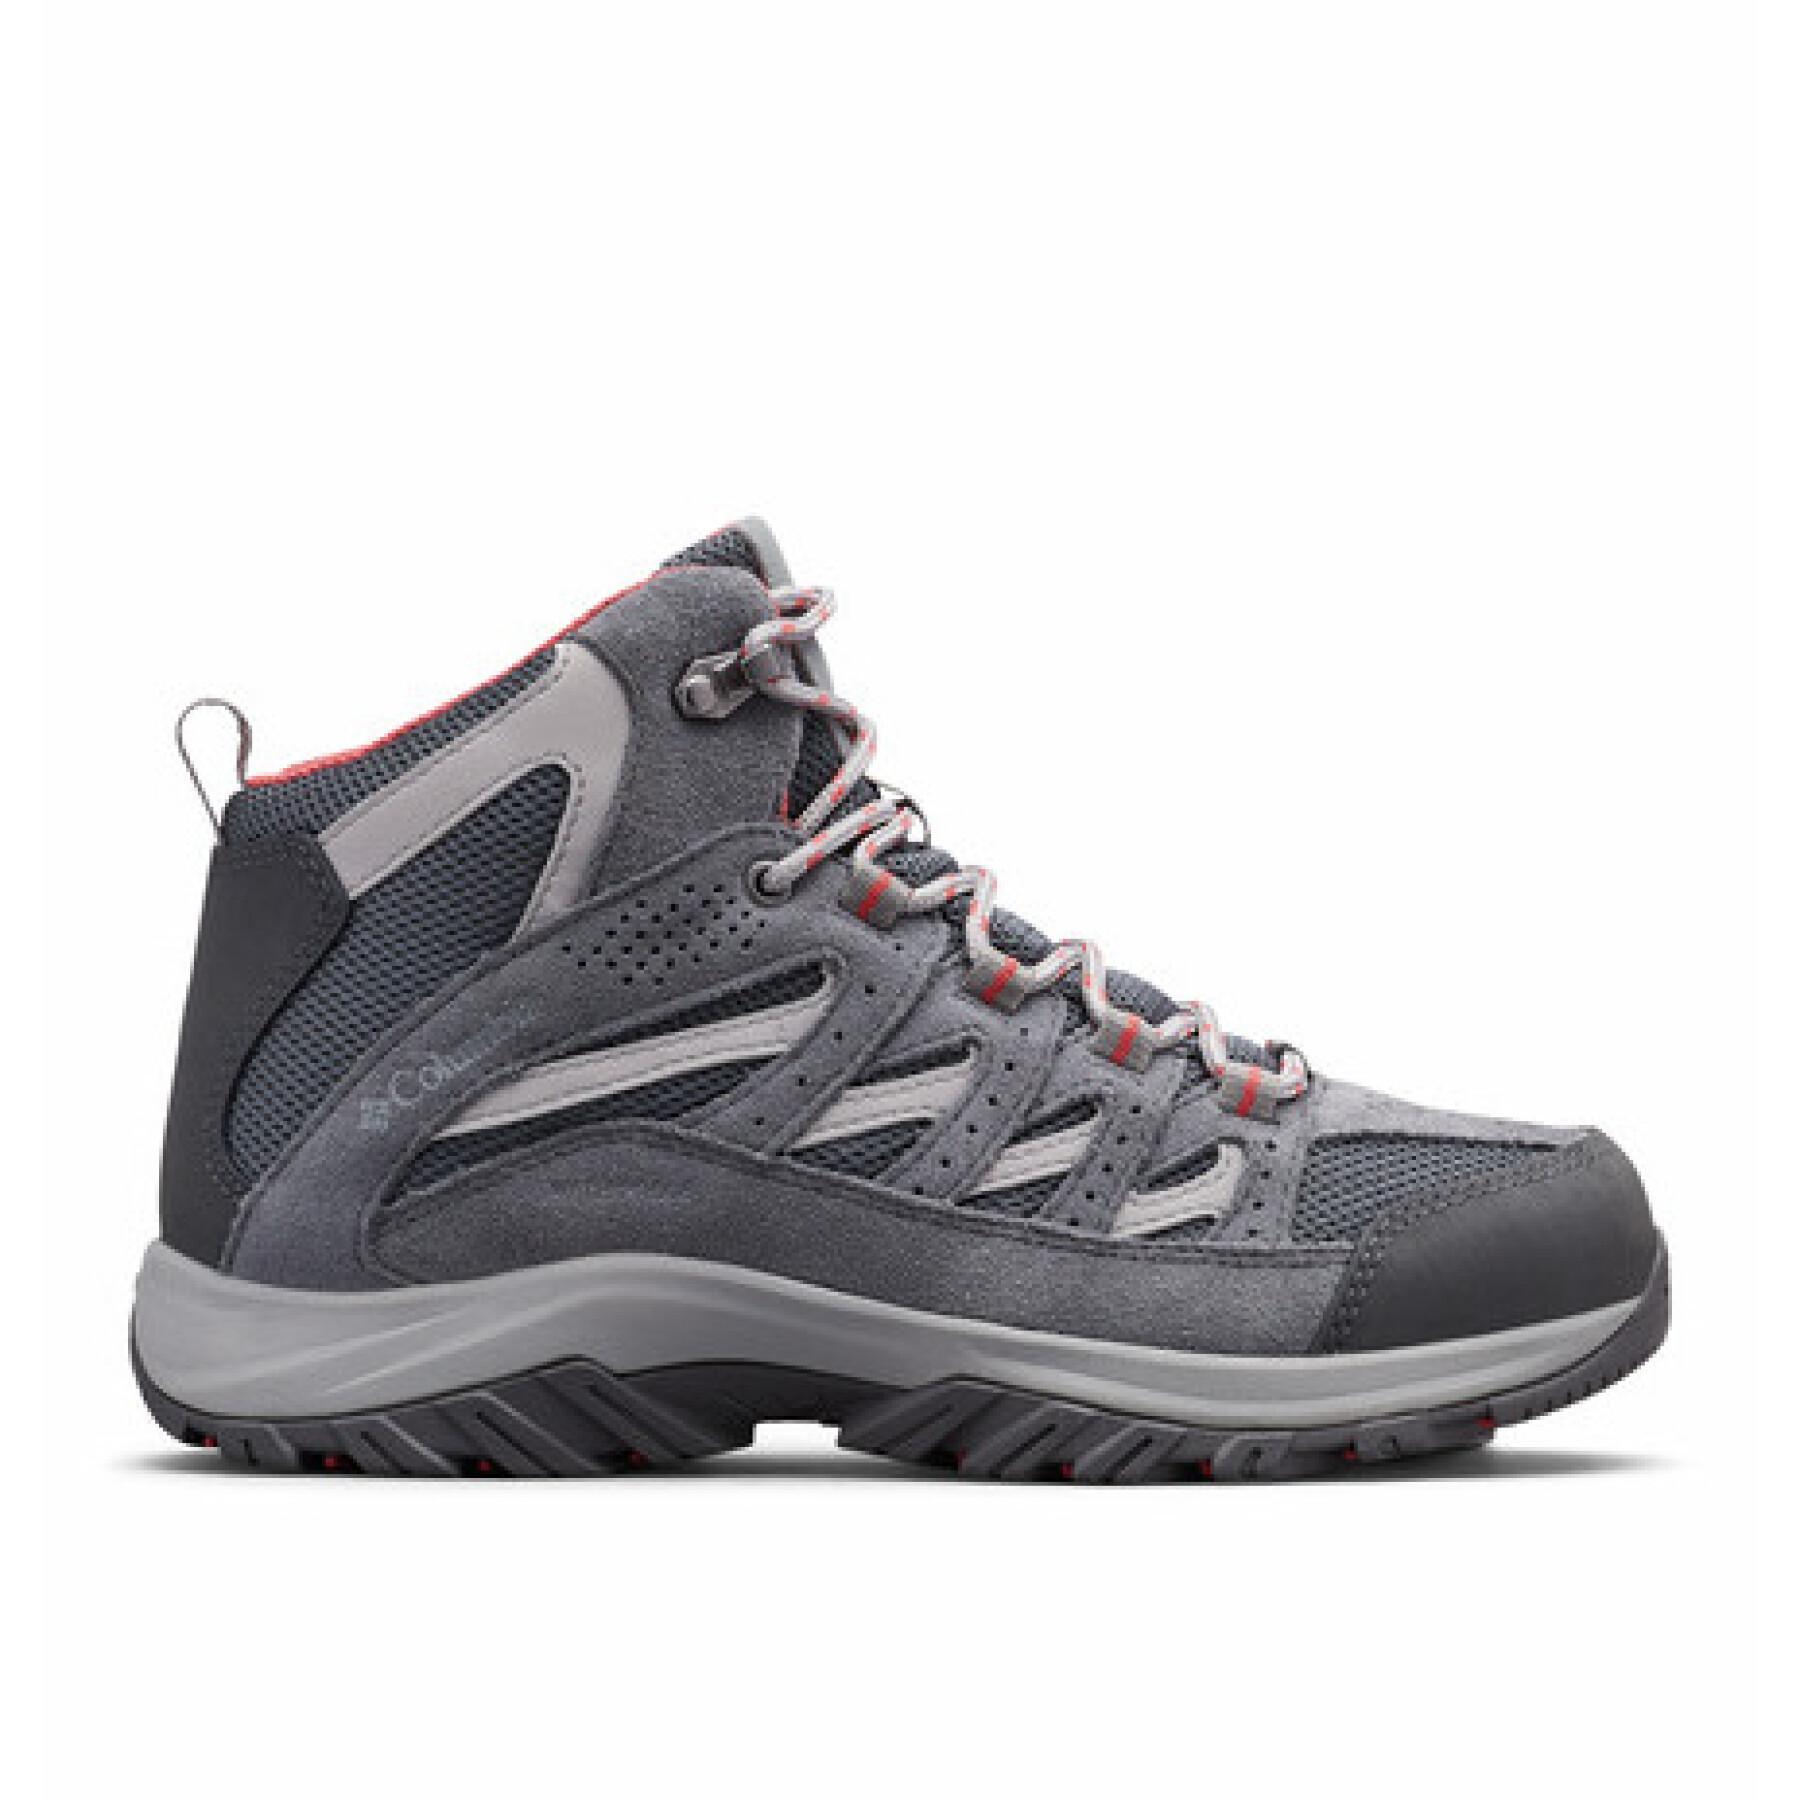 Chaussures femme Columbia Crestwood Mid waterproof